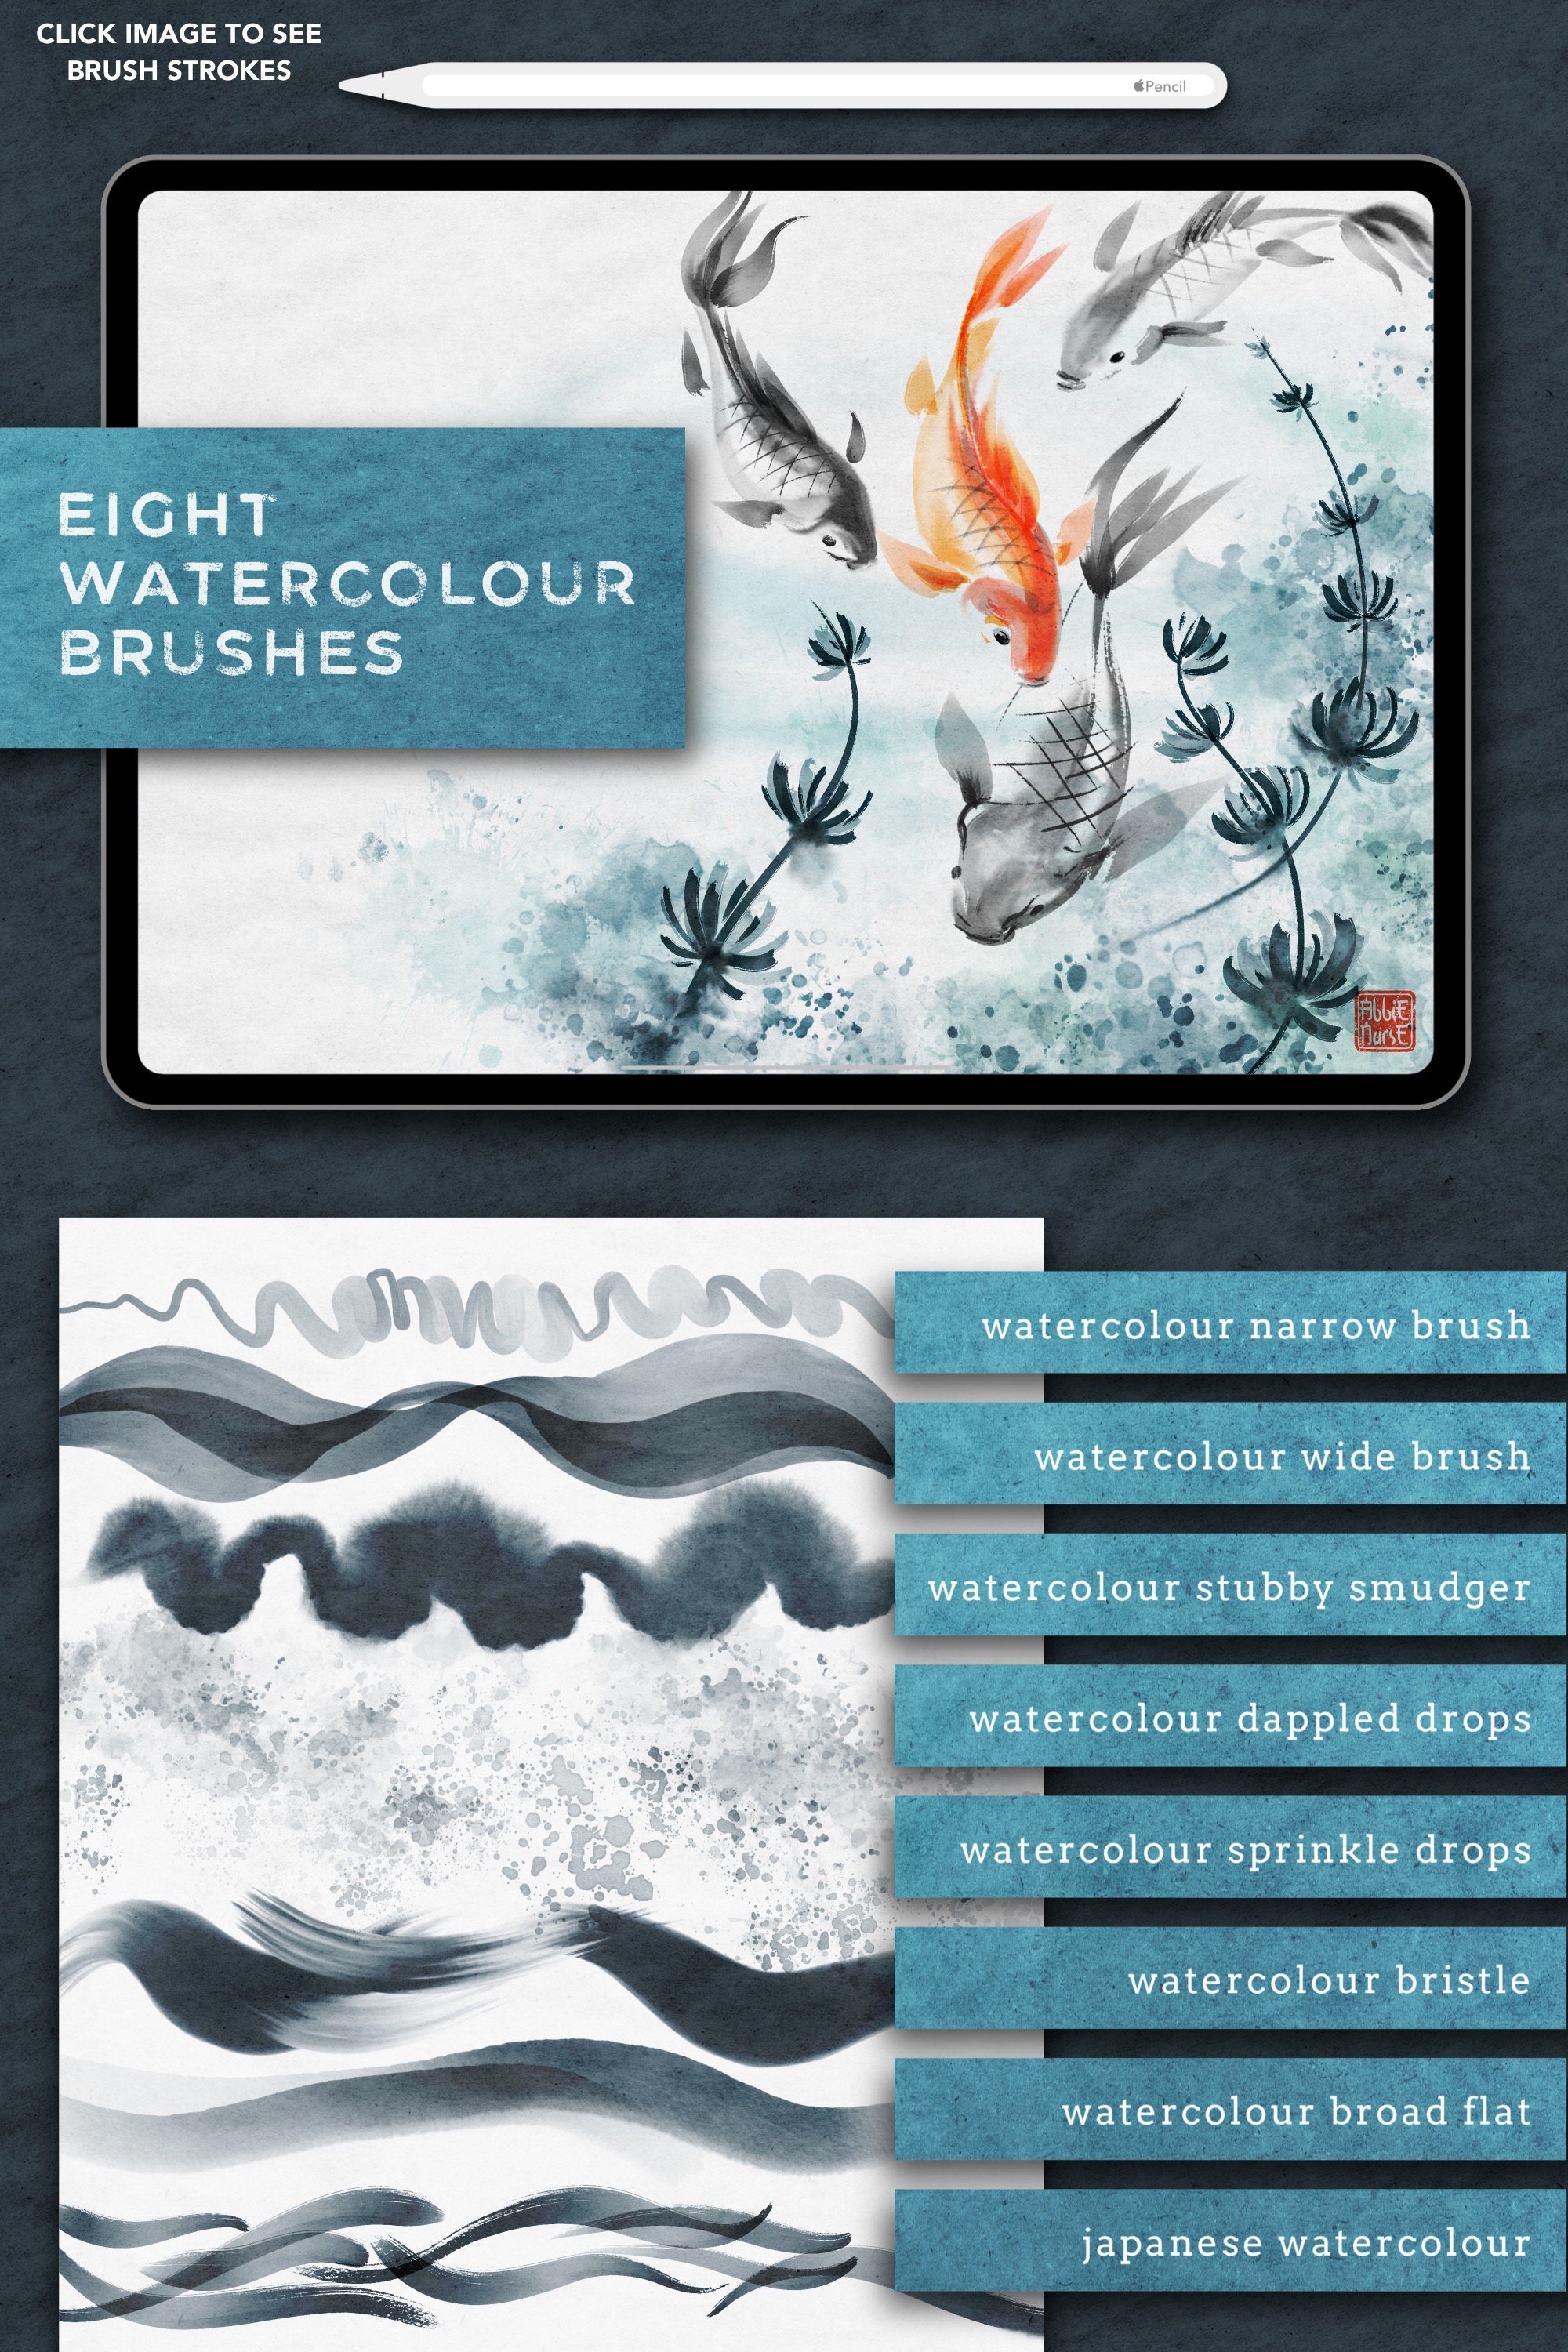 Diverse of cool brushes for your illustration.